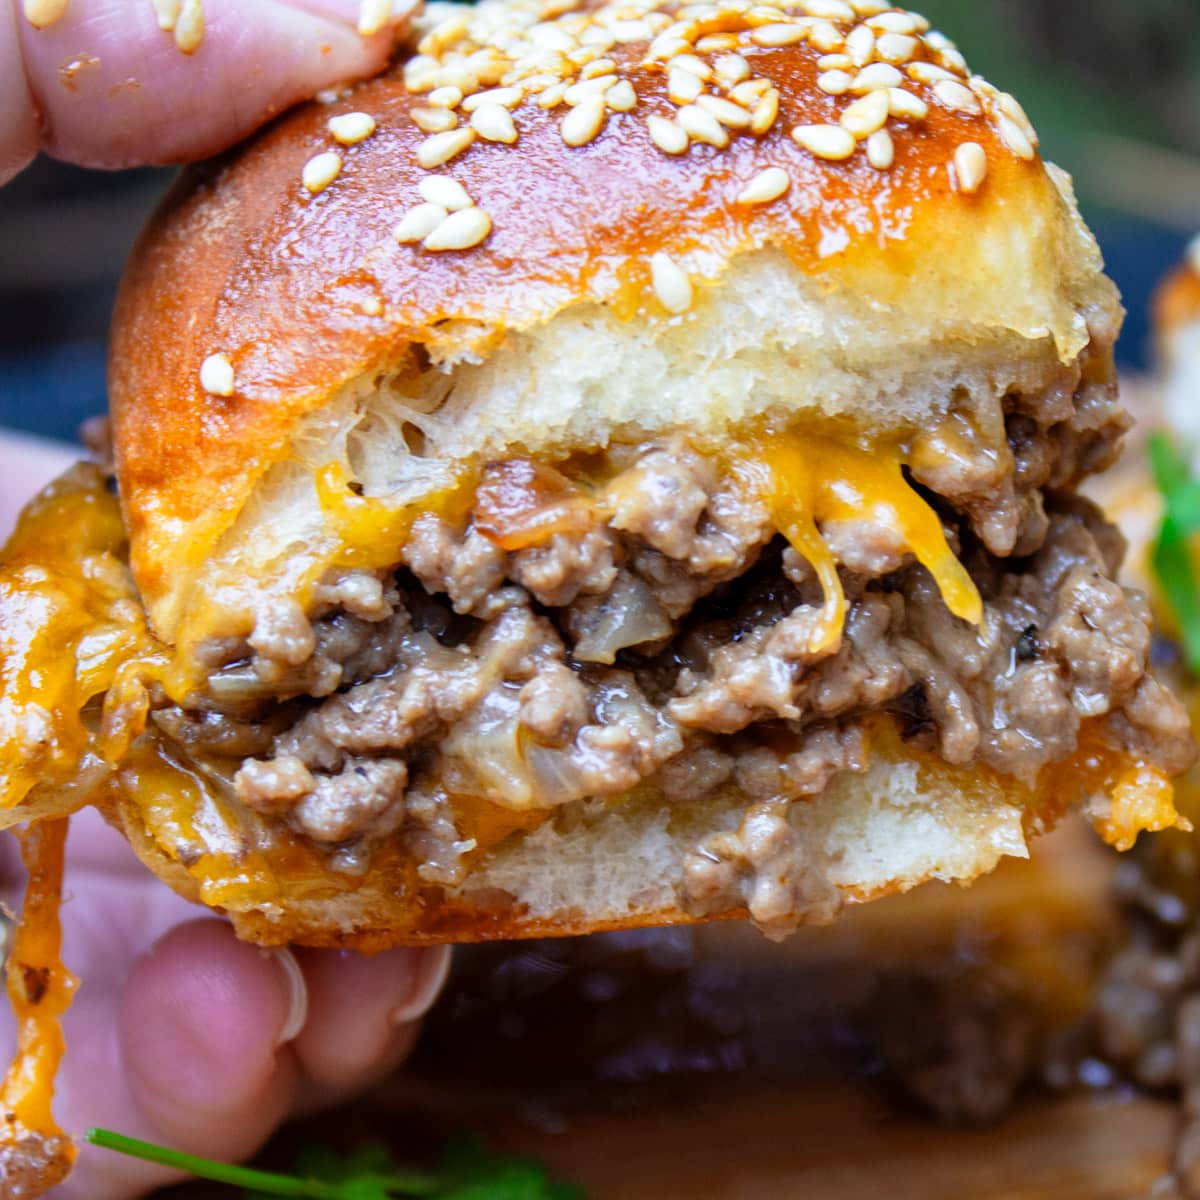 cheeseburger slider held in a hand.